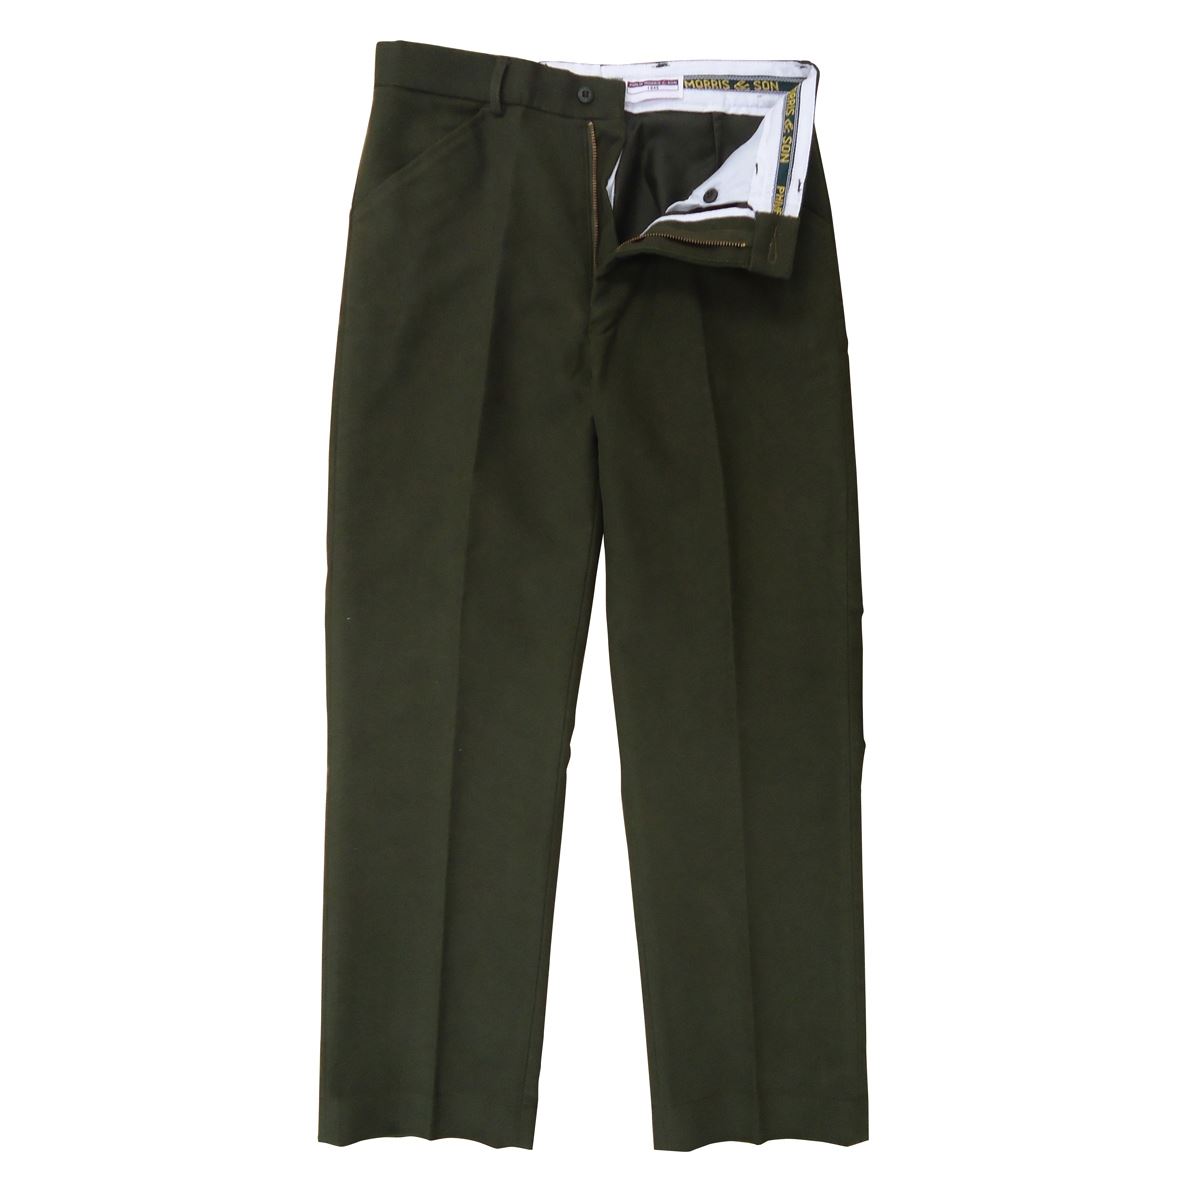 Heritage 1845 Moleskin Trousers Questions & Answers